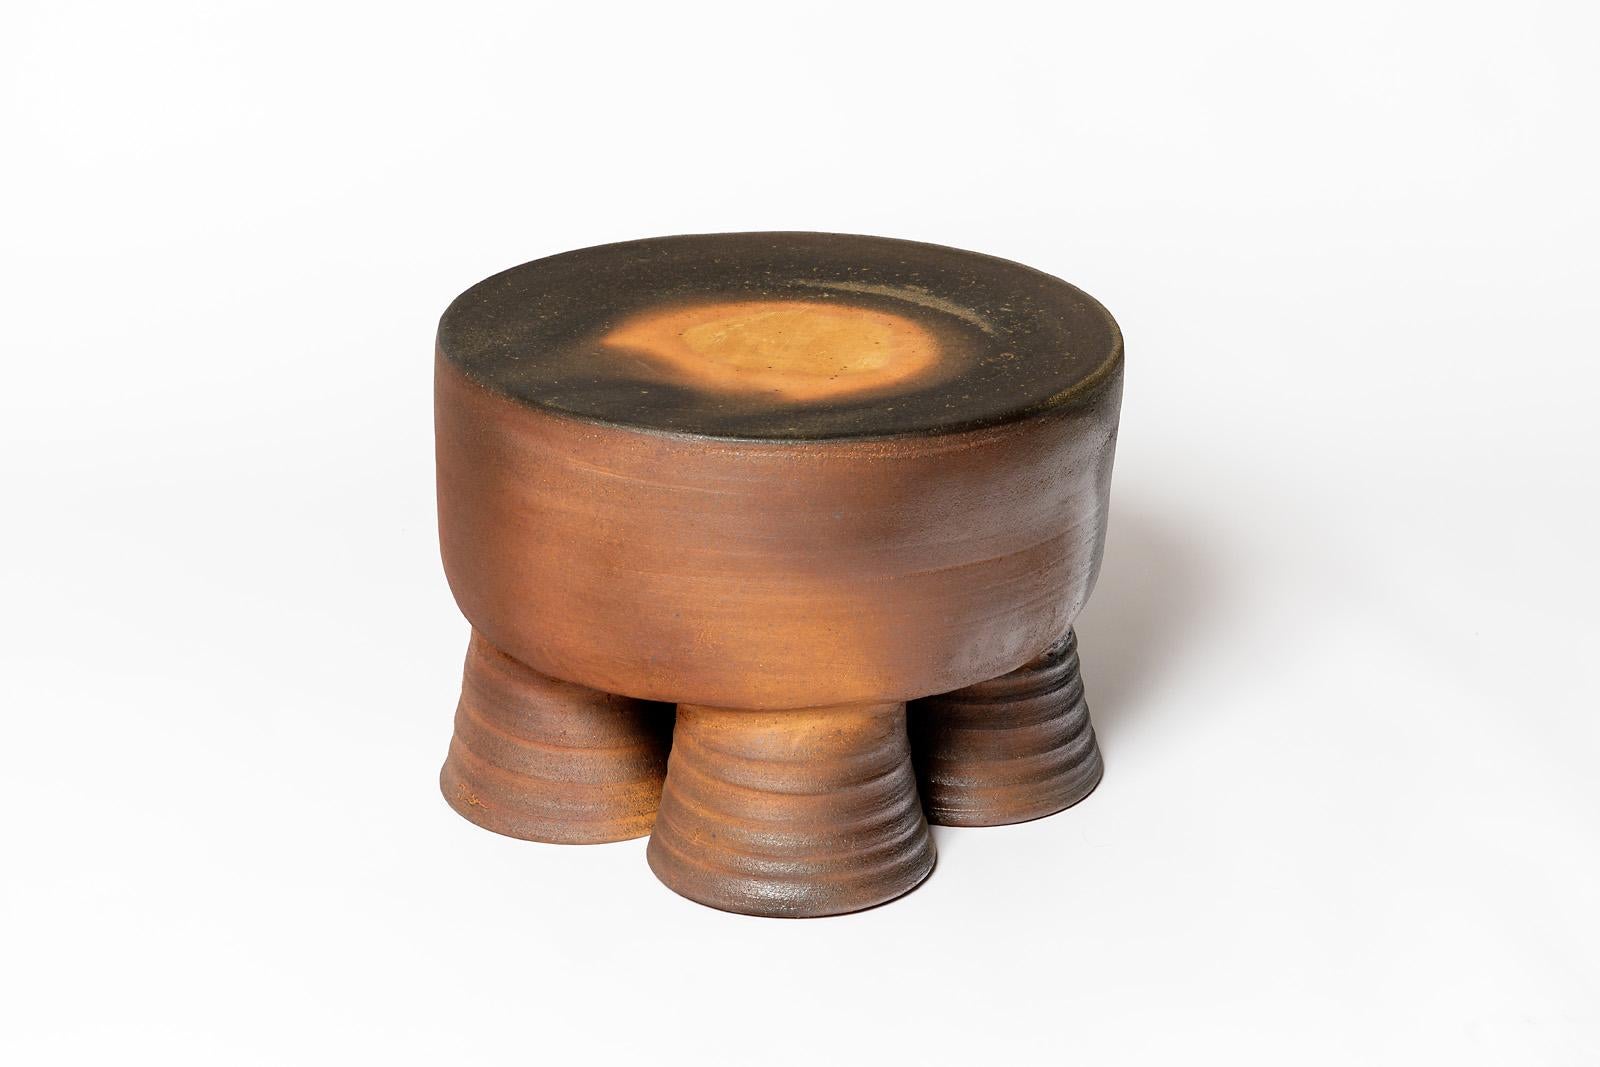 Wood fired ceramic stool or coffee table by Mia Jensen. Artist signature under the base. 2024.
H : 12.2’ x 17.3’ inches.